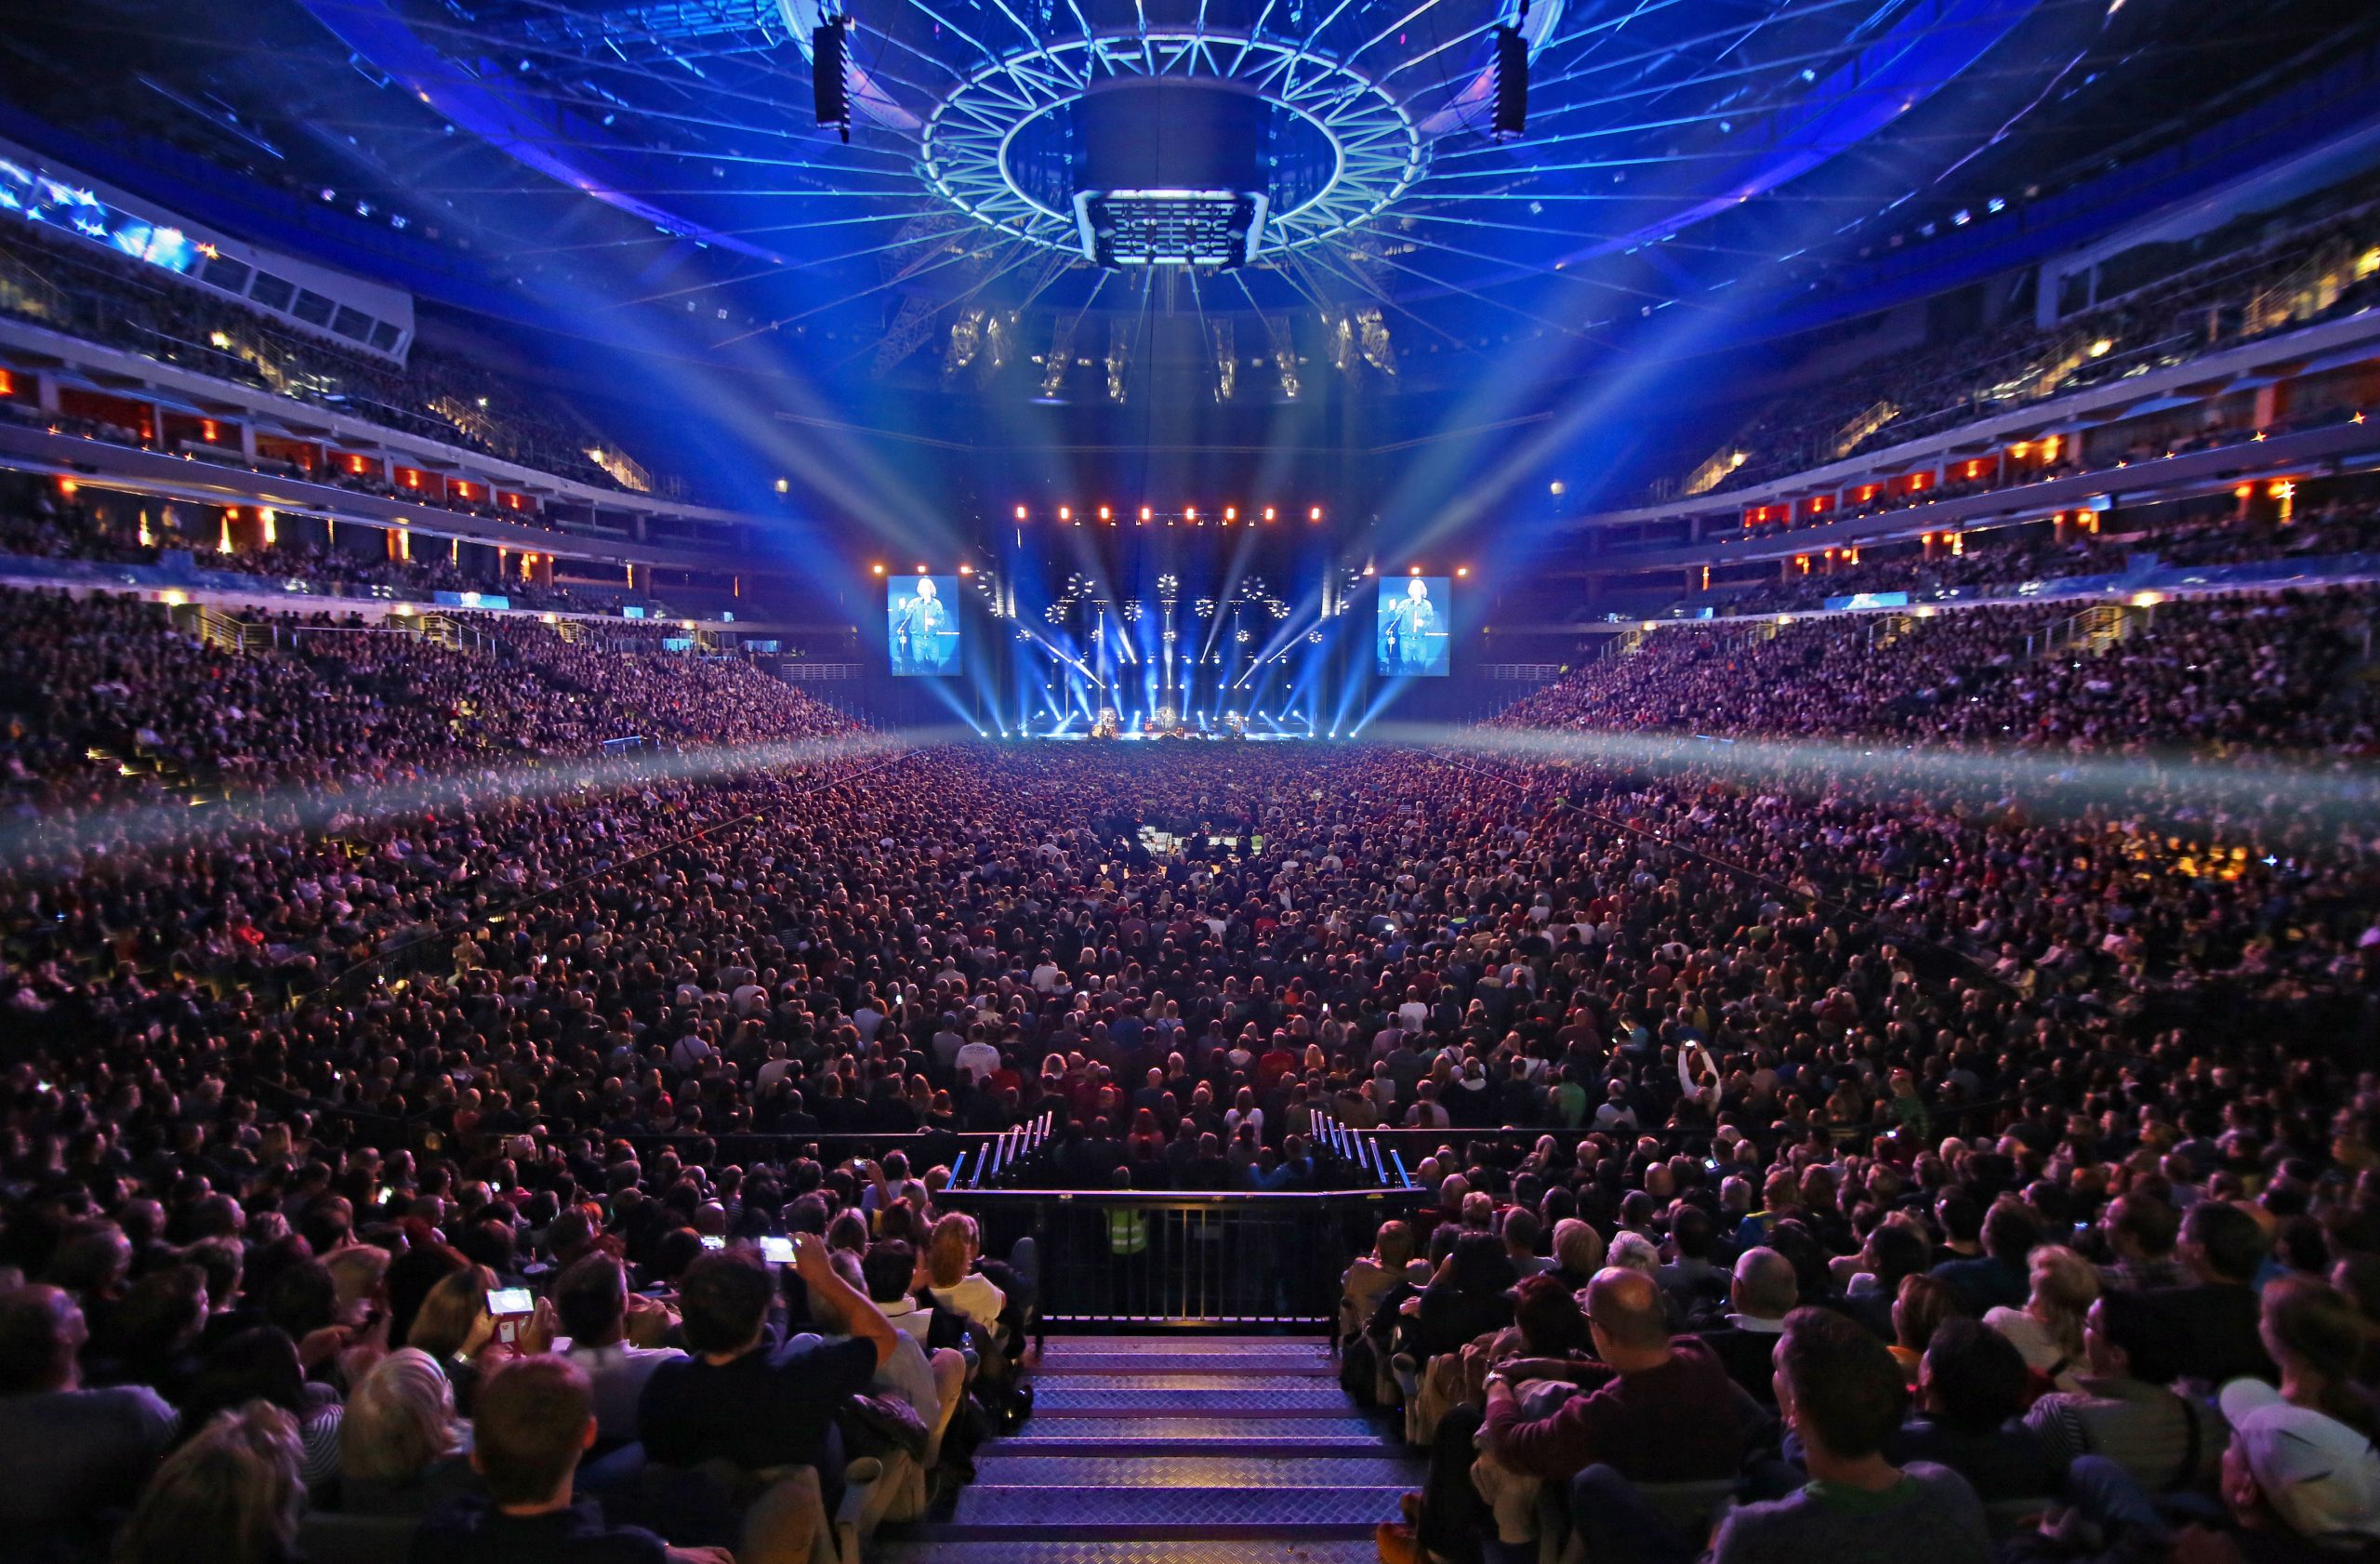 Thumbnail # 2018 was the second most successful year in terms of attendance of O2 arena